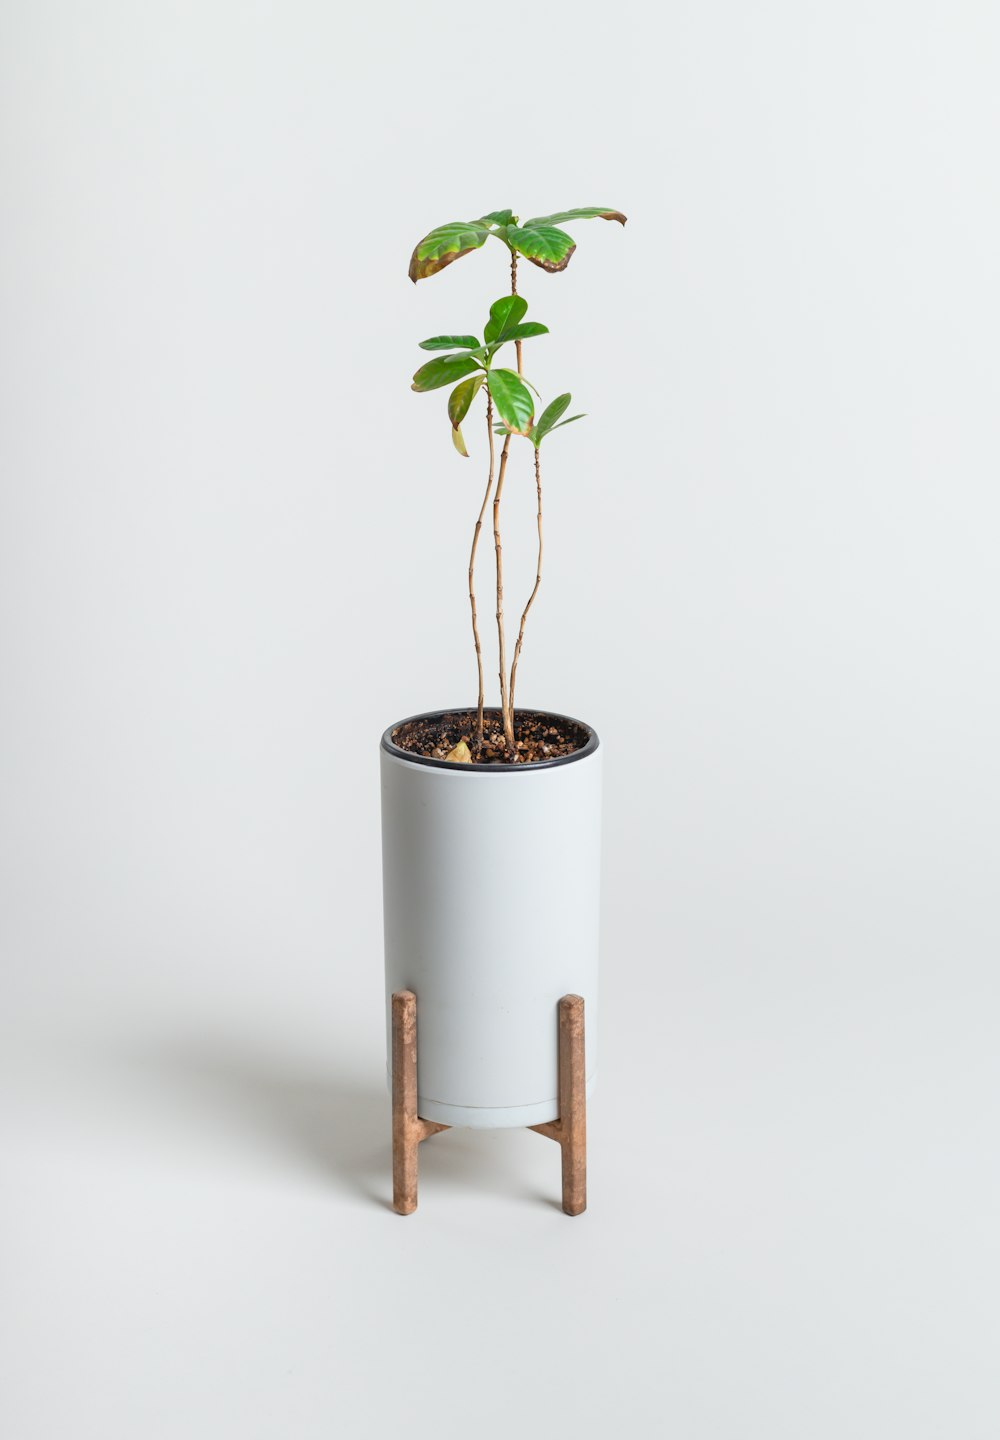 a small plant in a pot